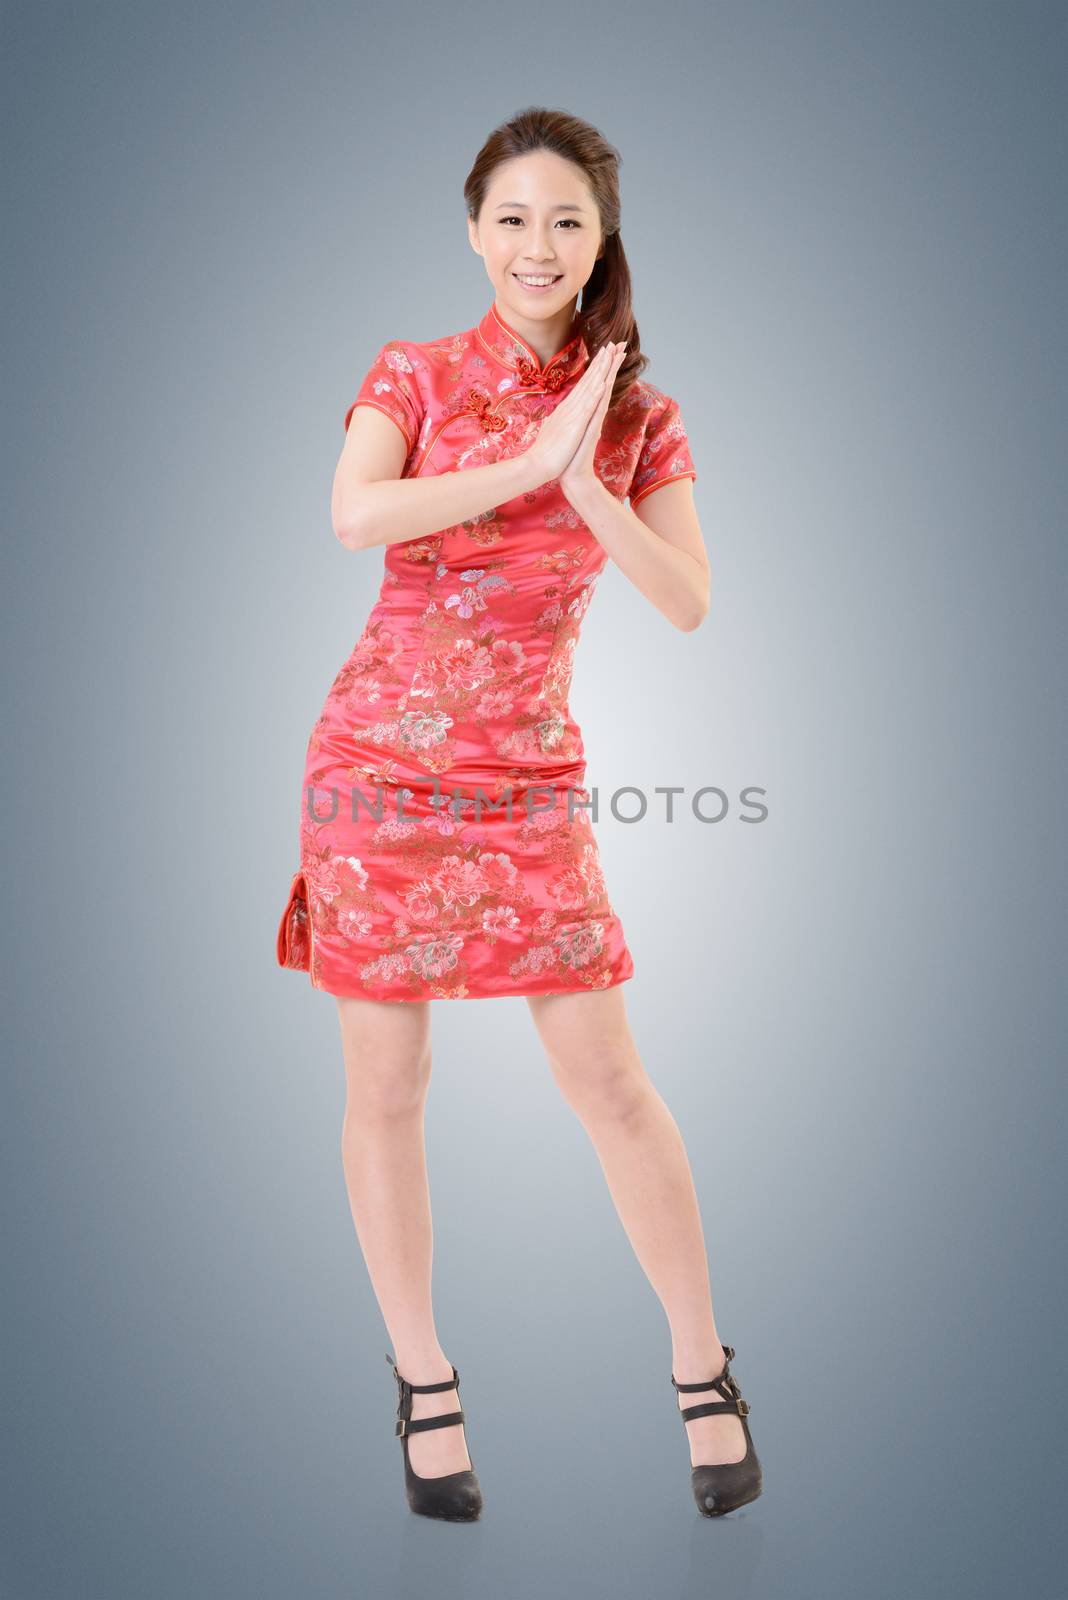 Smiling Chinese woman dress traditional cheongsam at New Year, studio shot isolated.